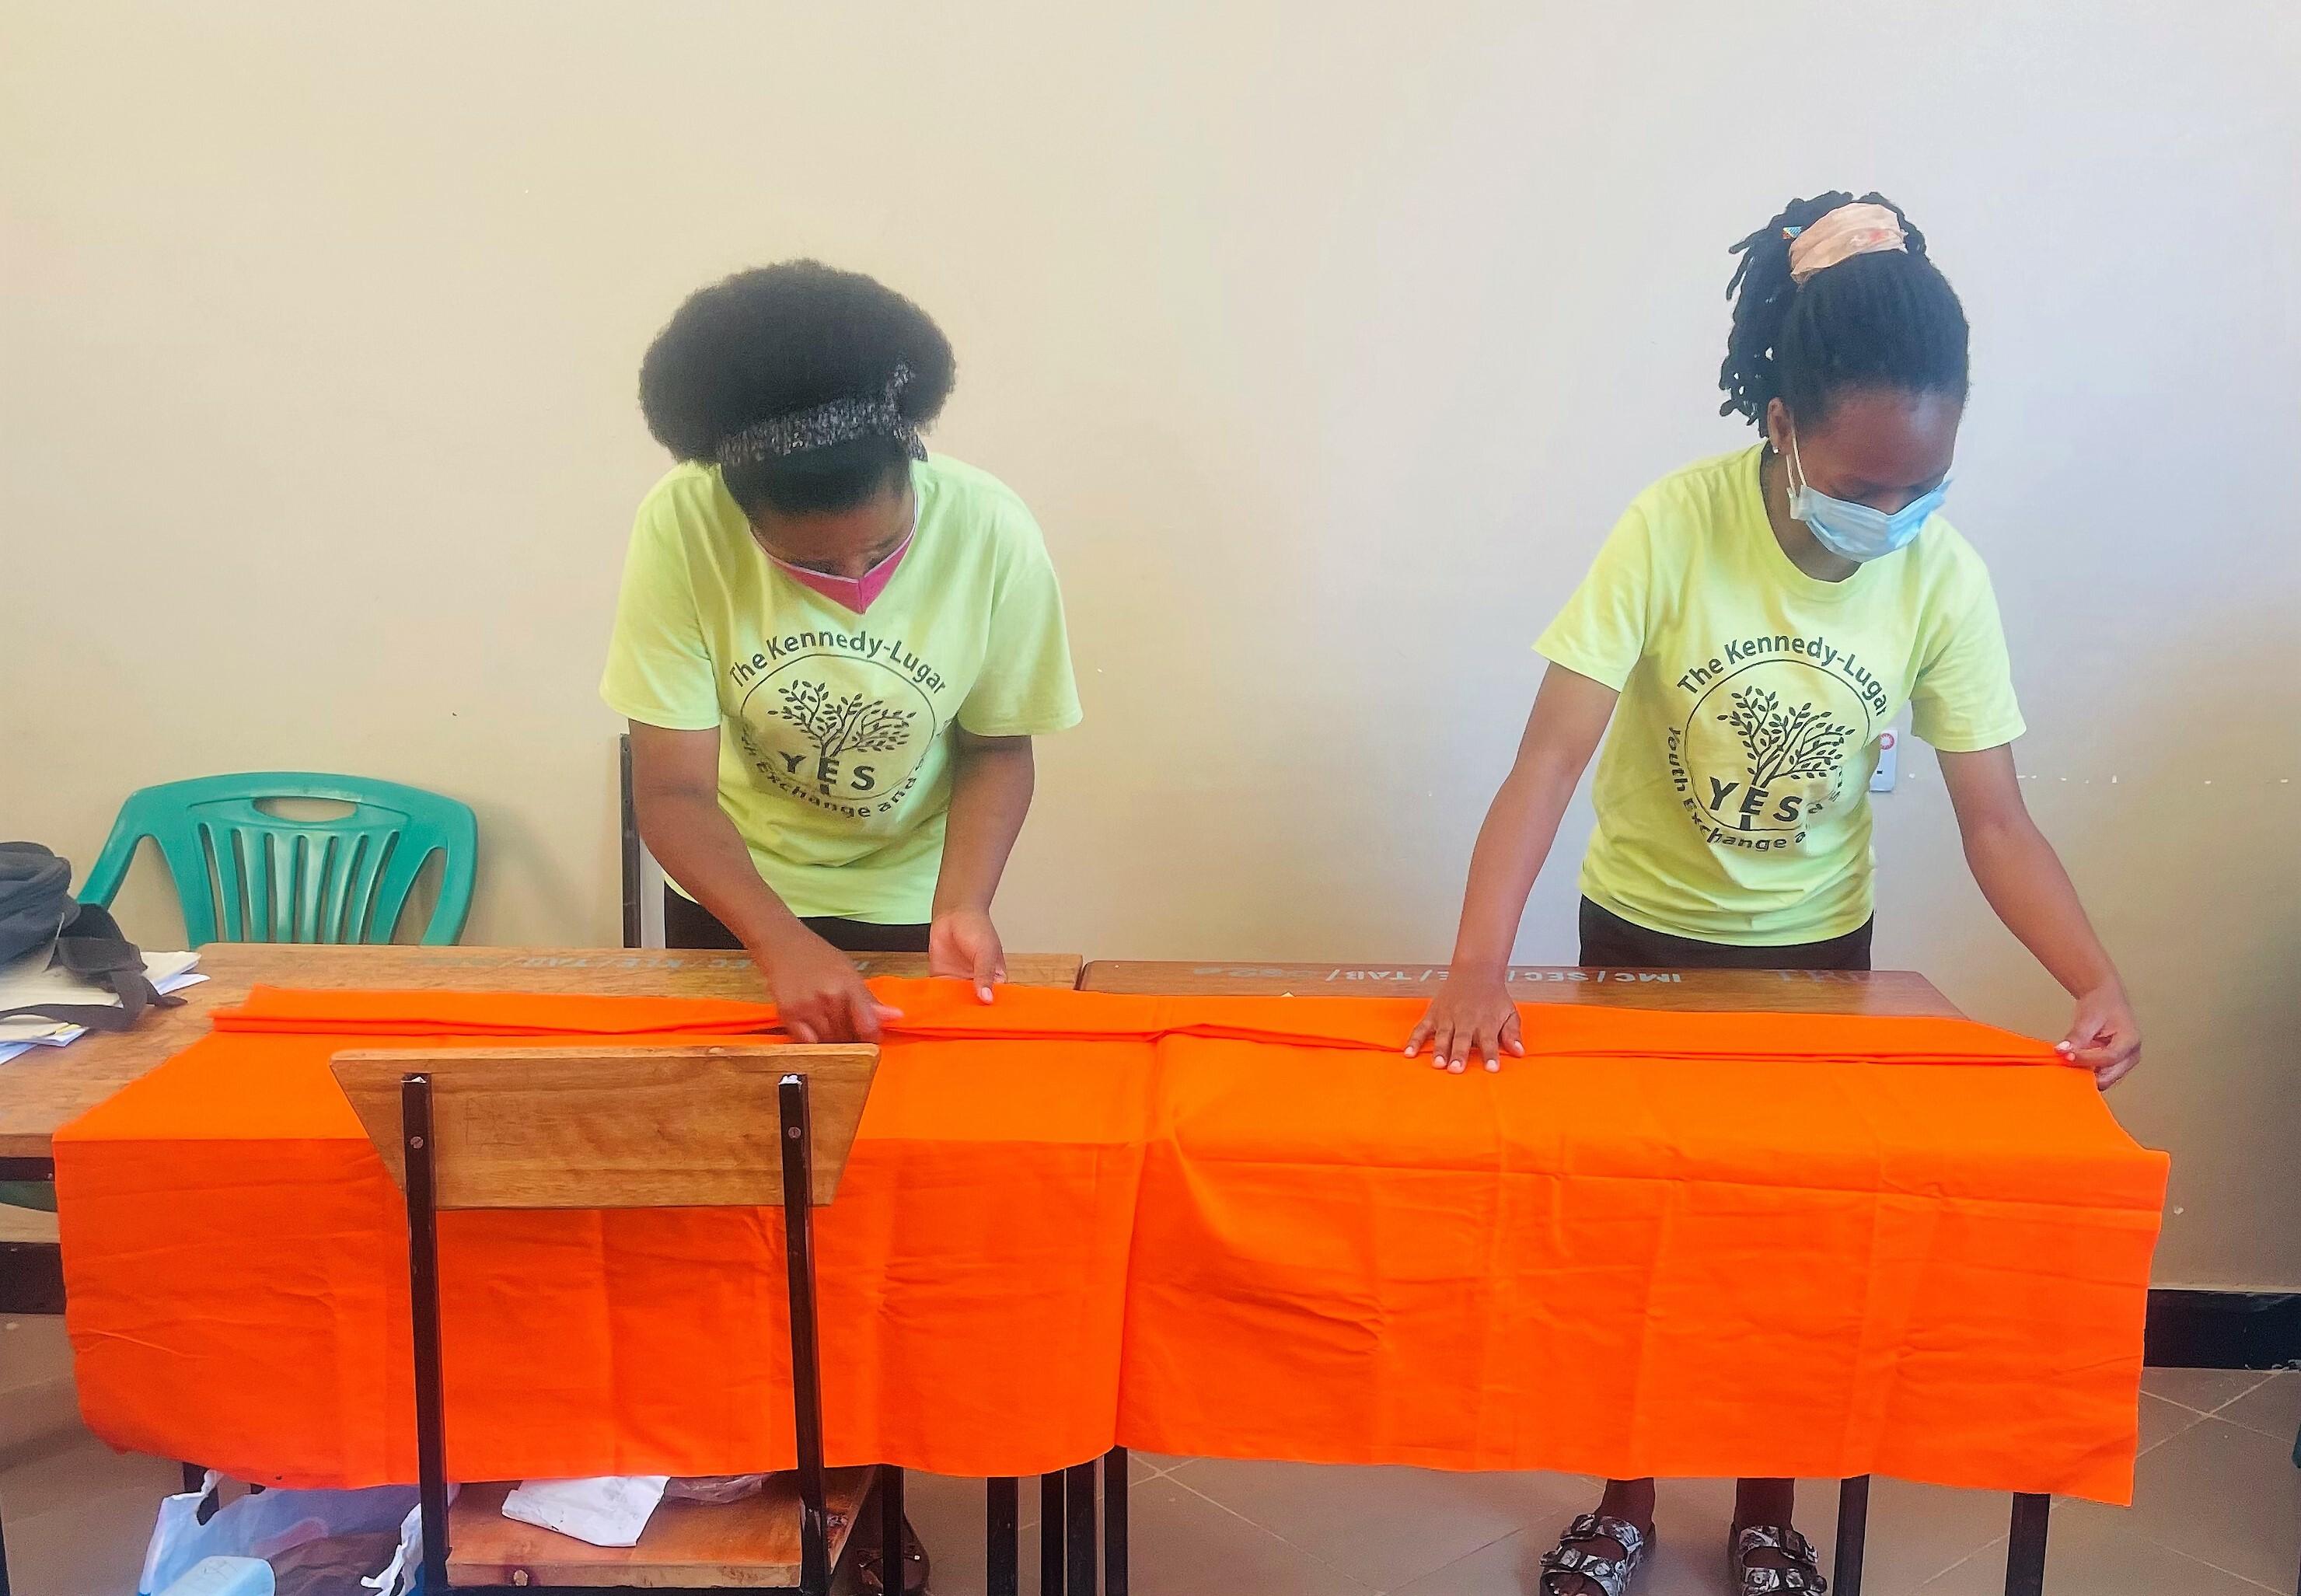 Two Alumni Team Members Are Standing Behind A Table Demonstrating Tie Dye Steps For Making Colorful Patterns Batik On A Piece Of Cloth